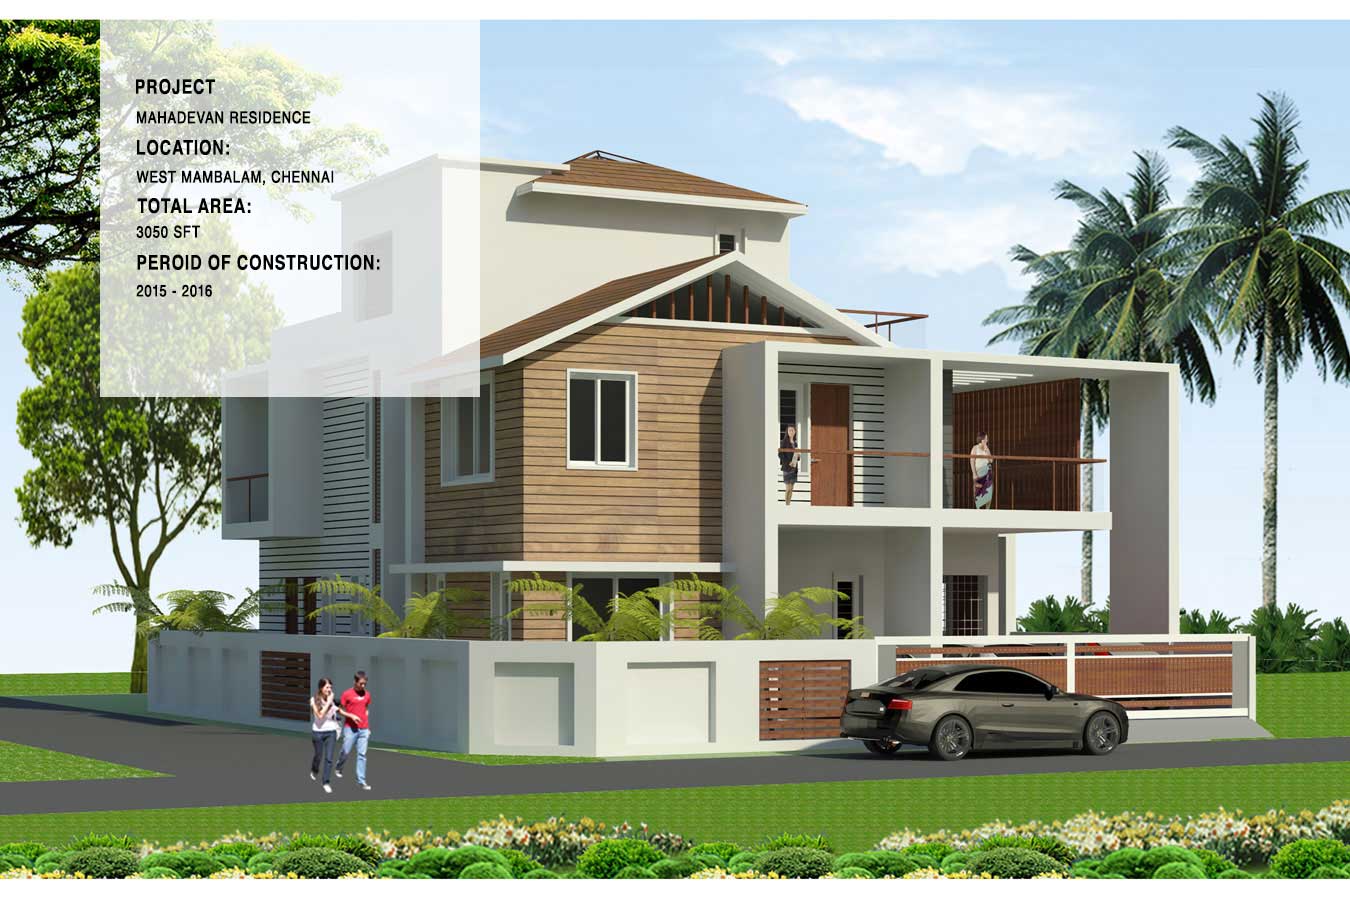 PROPOSED RESIDENCE AT WEST MAMBALAM